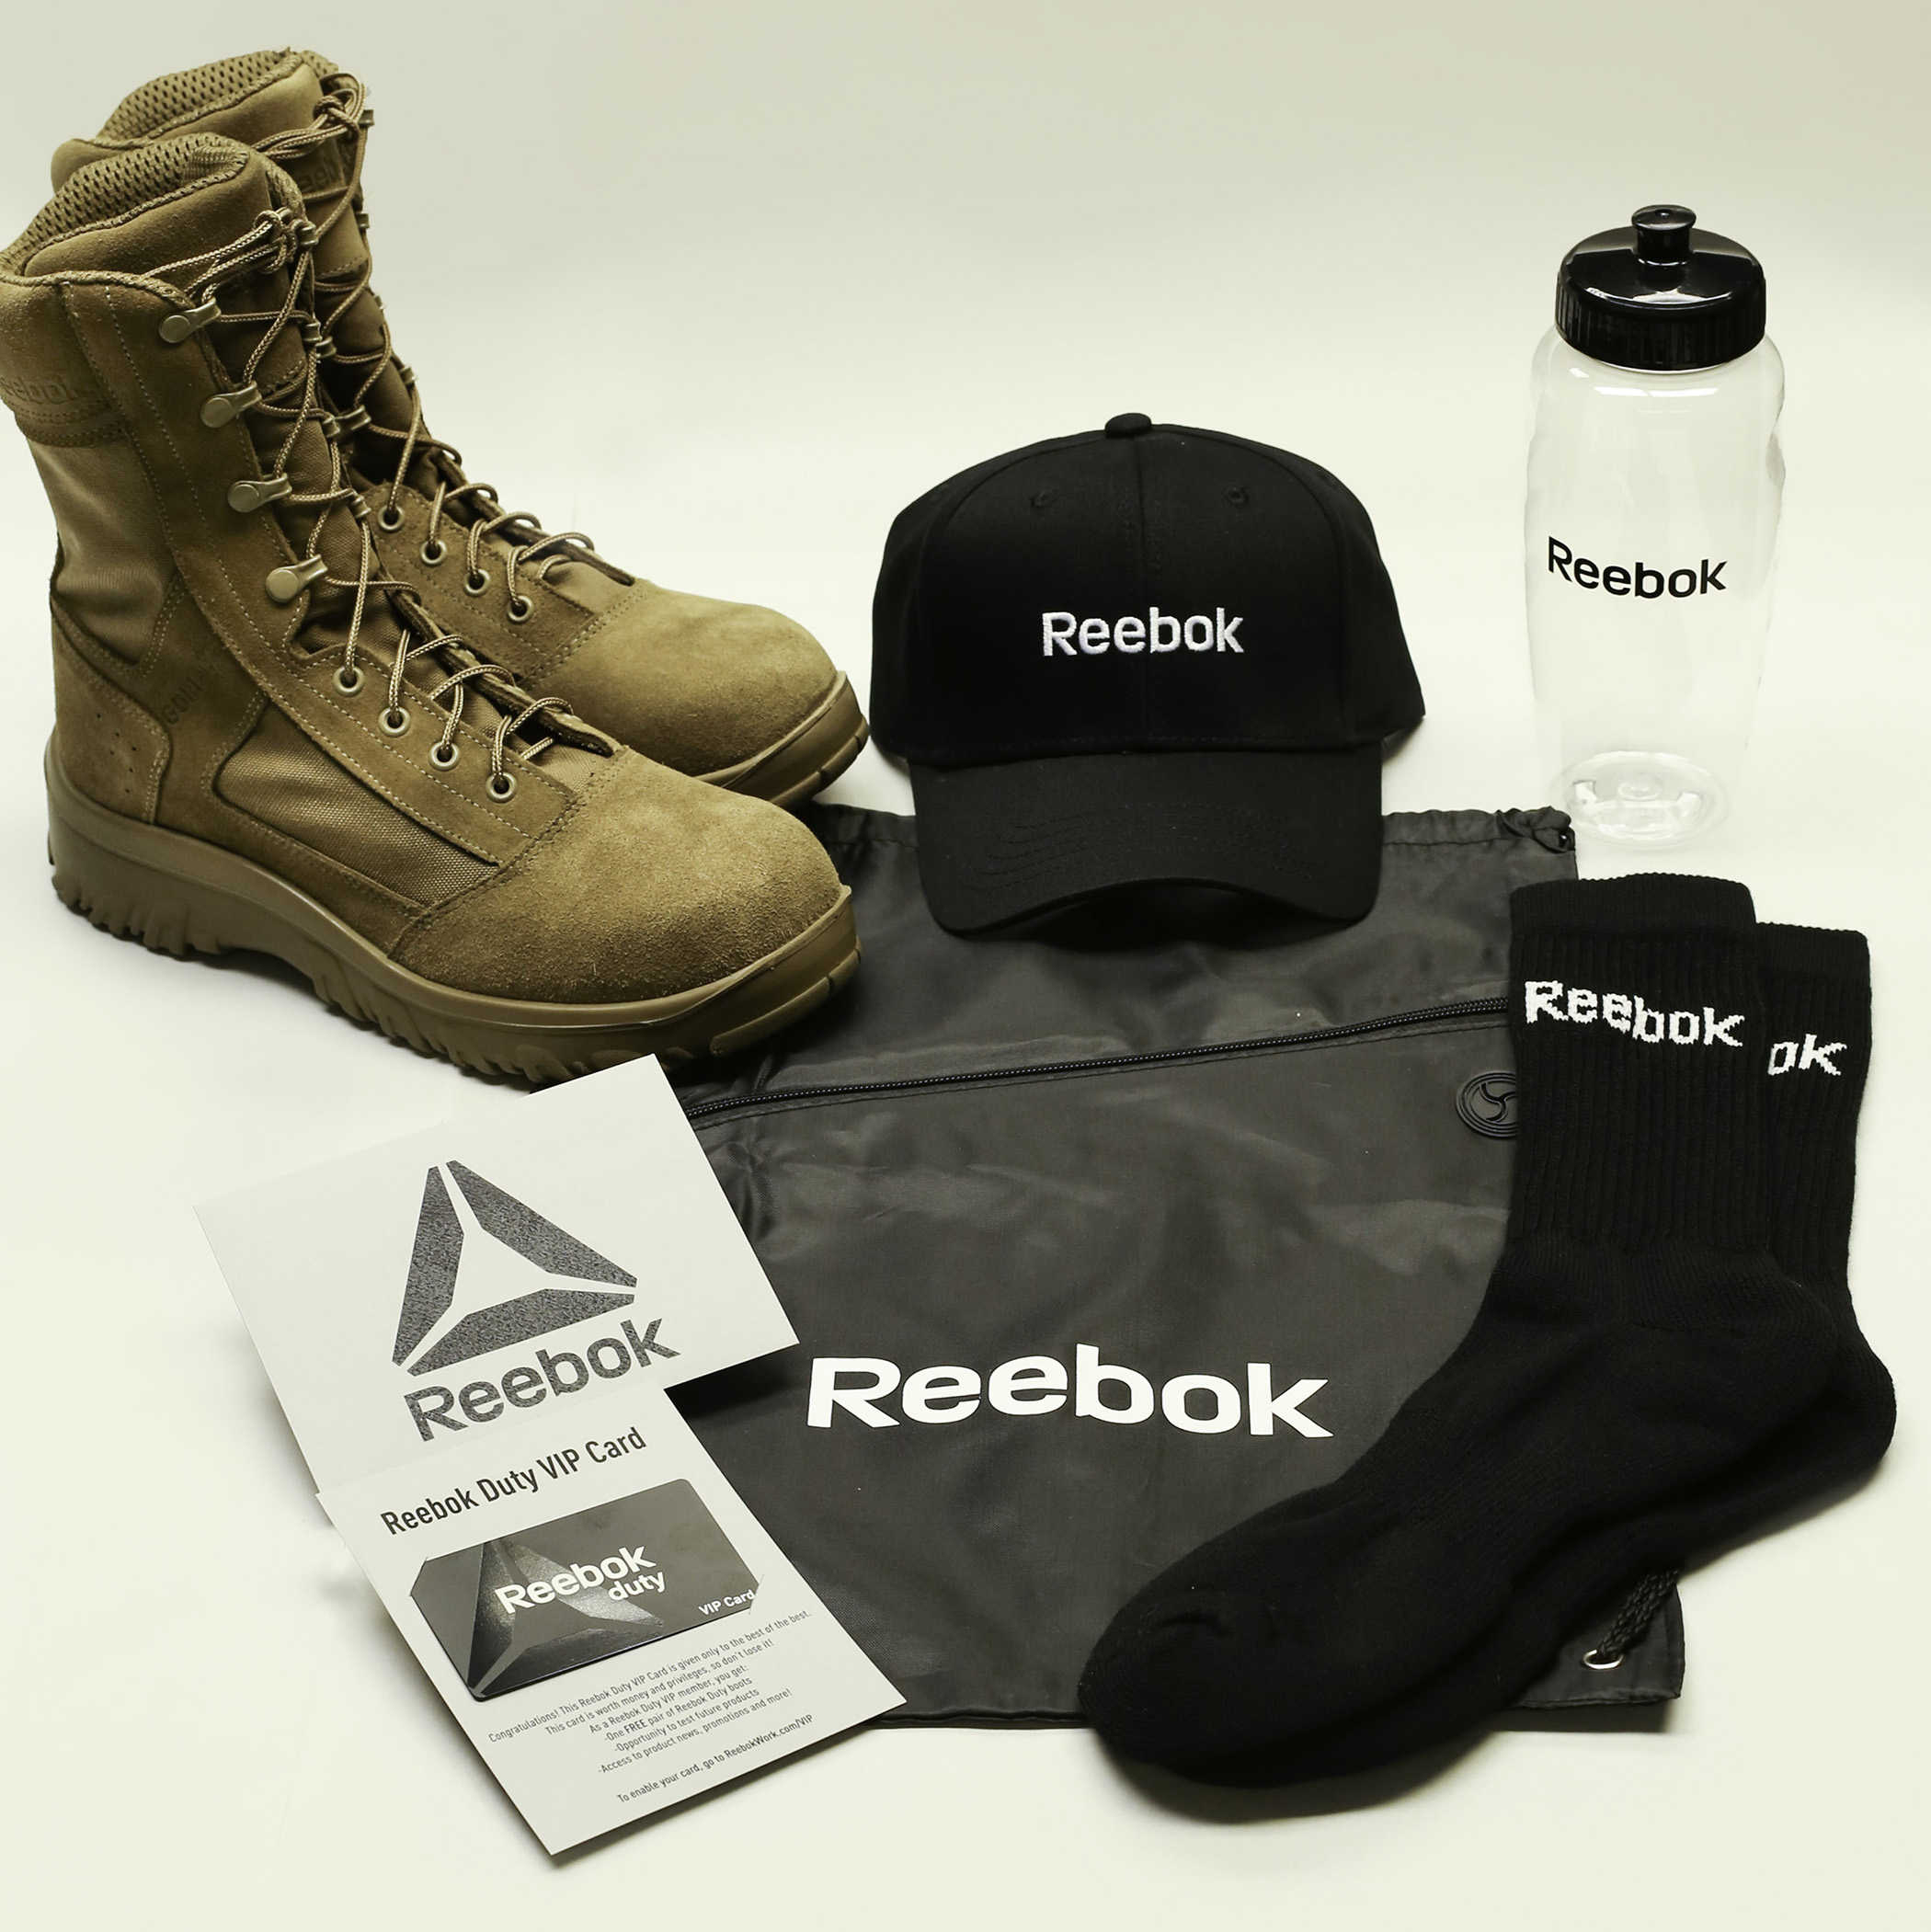 Reebok Provides High Performance Military Footwear to All